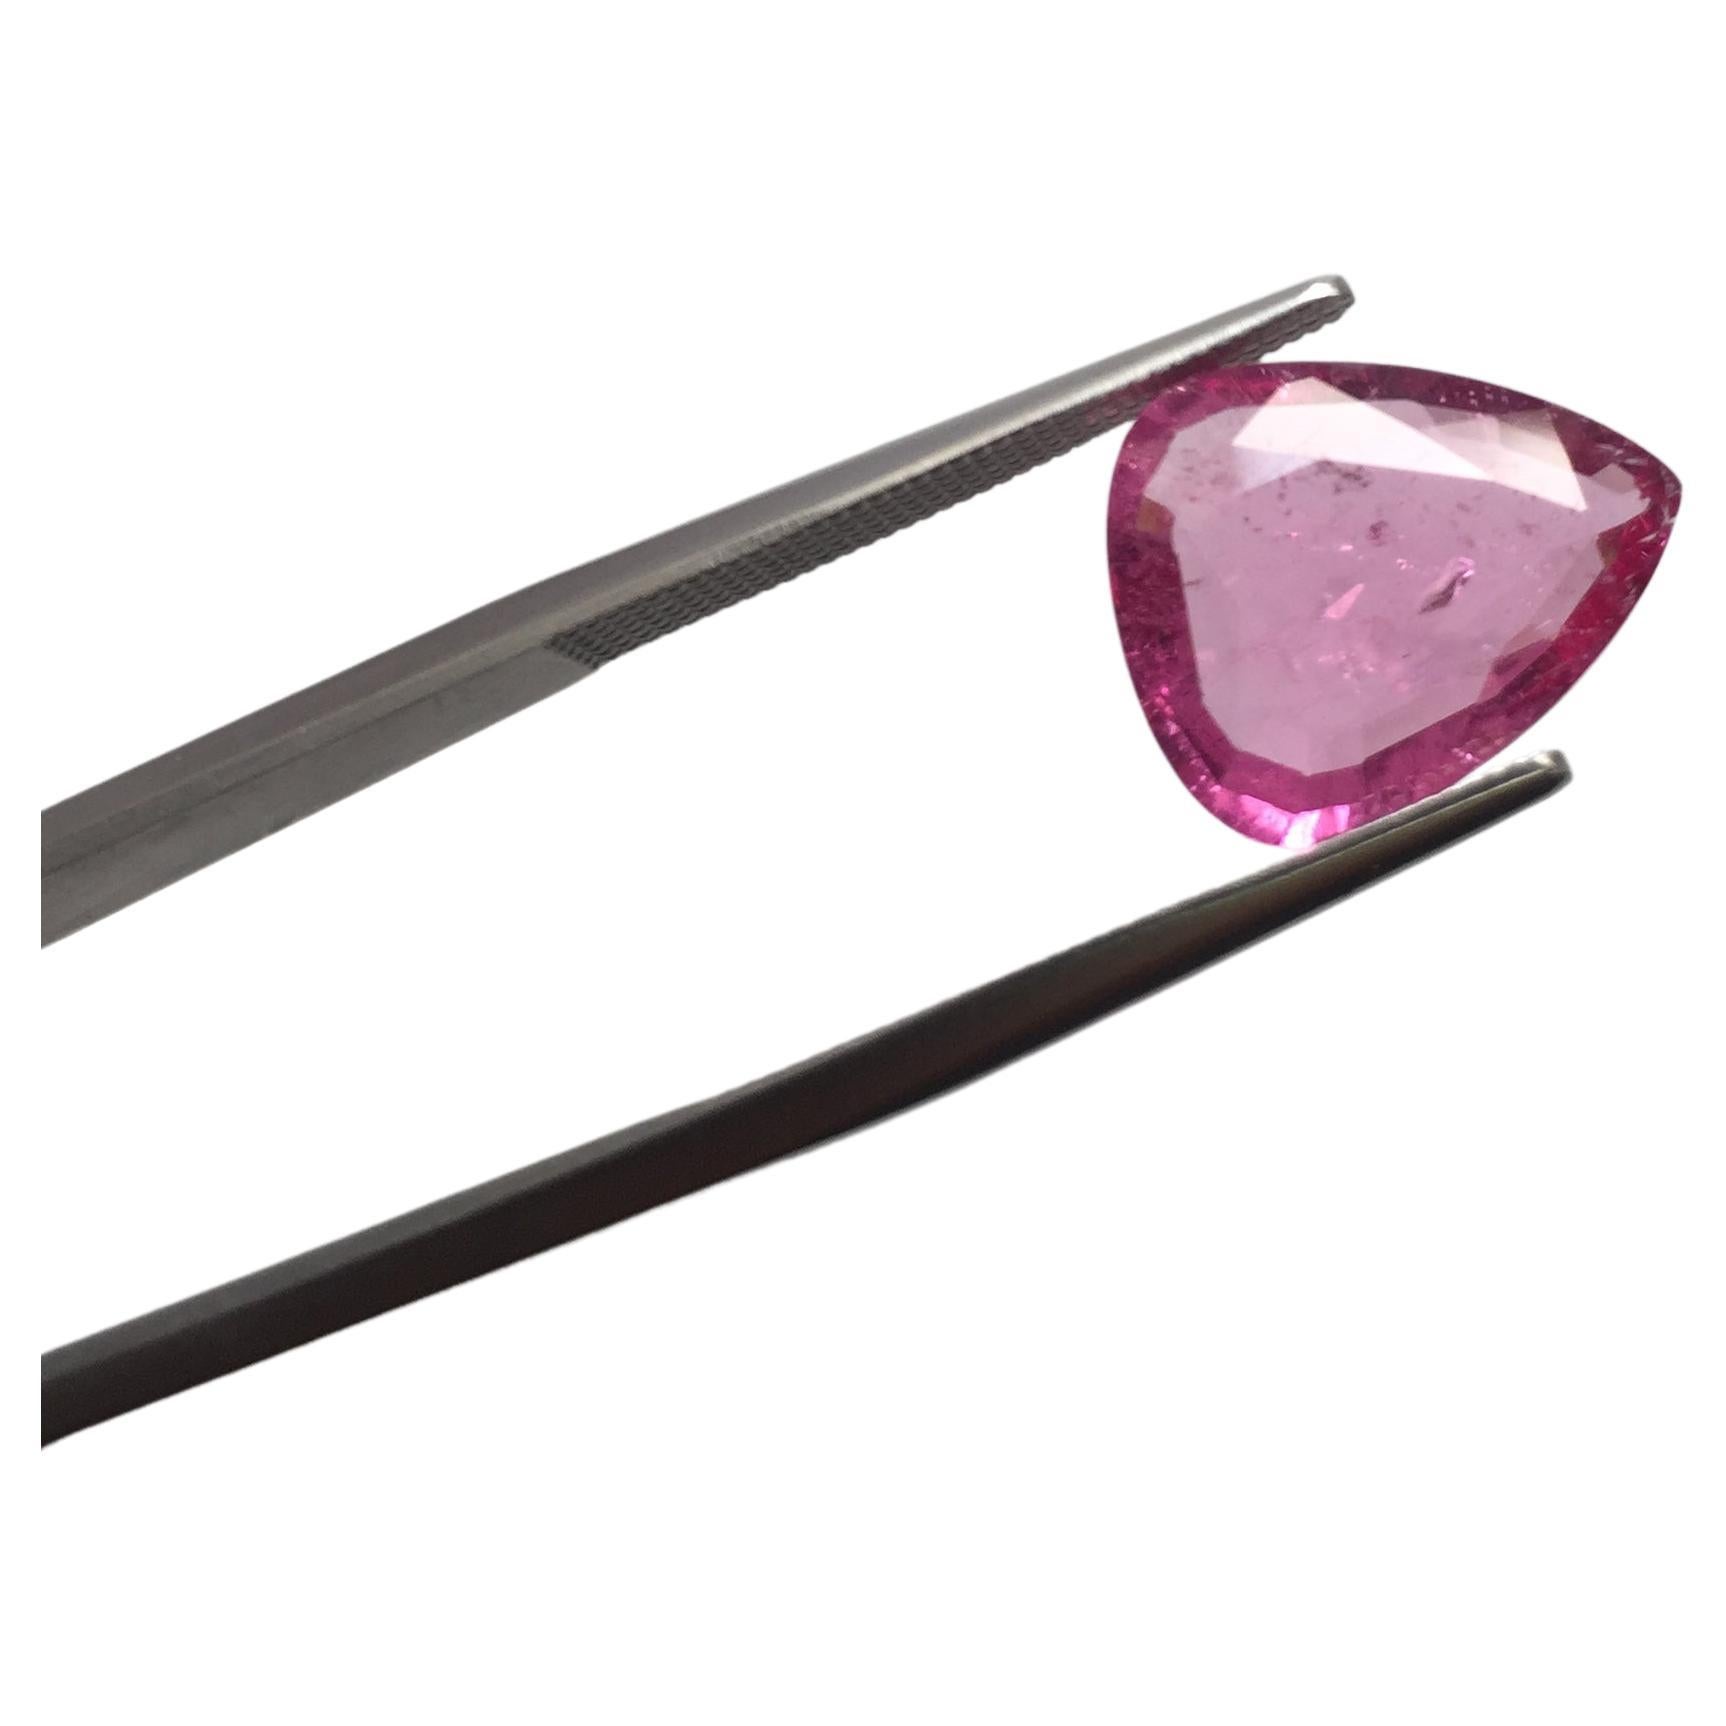 3.76 Carat Neon Pink Tourmaline Rose Cut / Pear Cut for High Jewelry For Sale